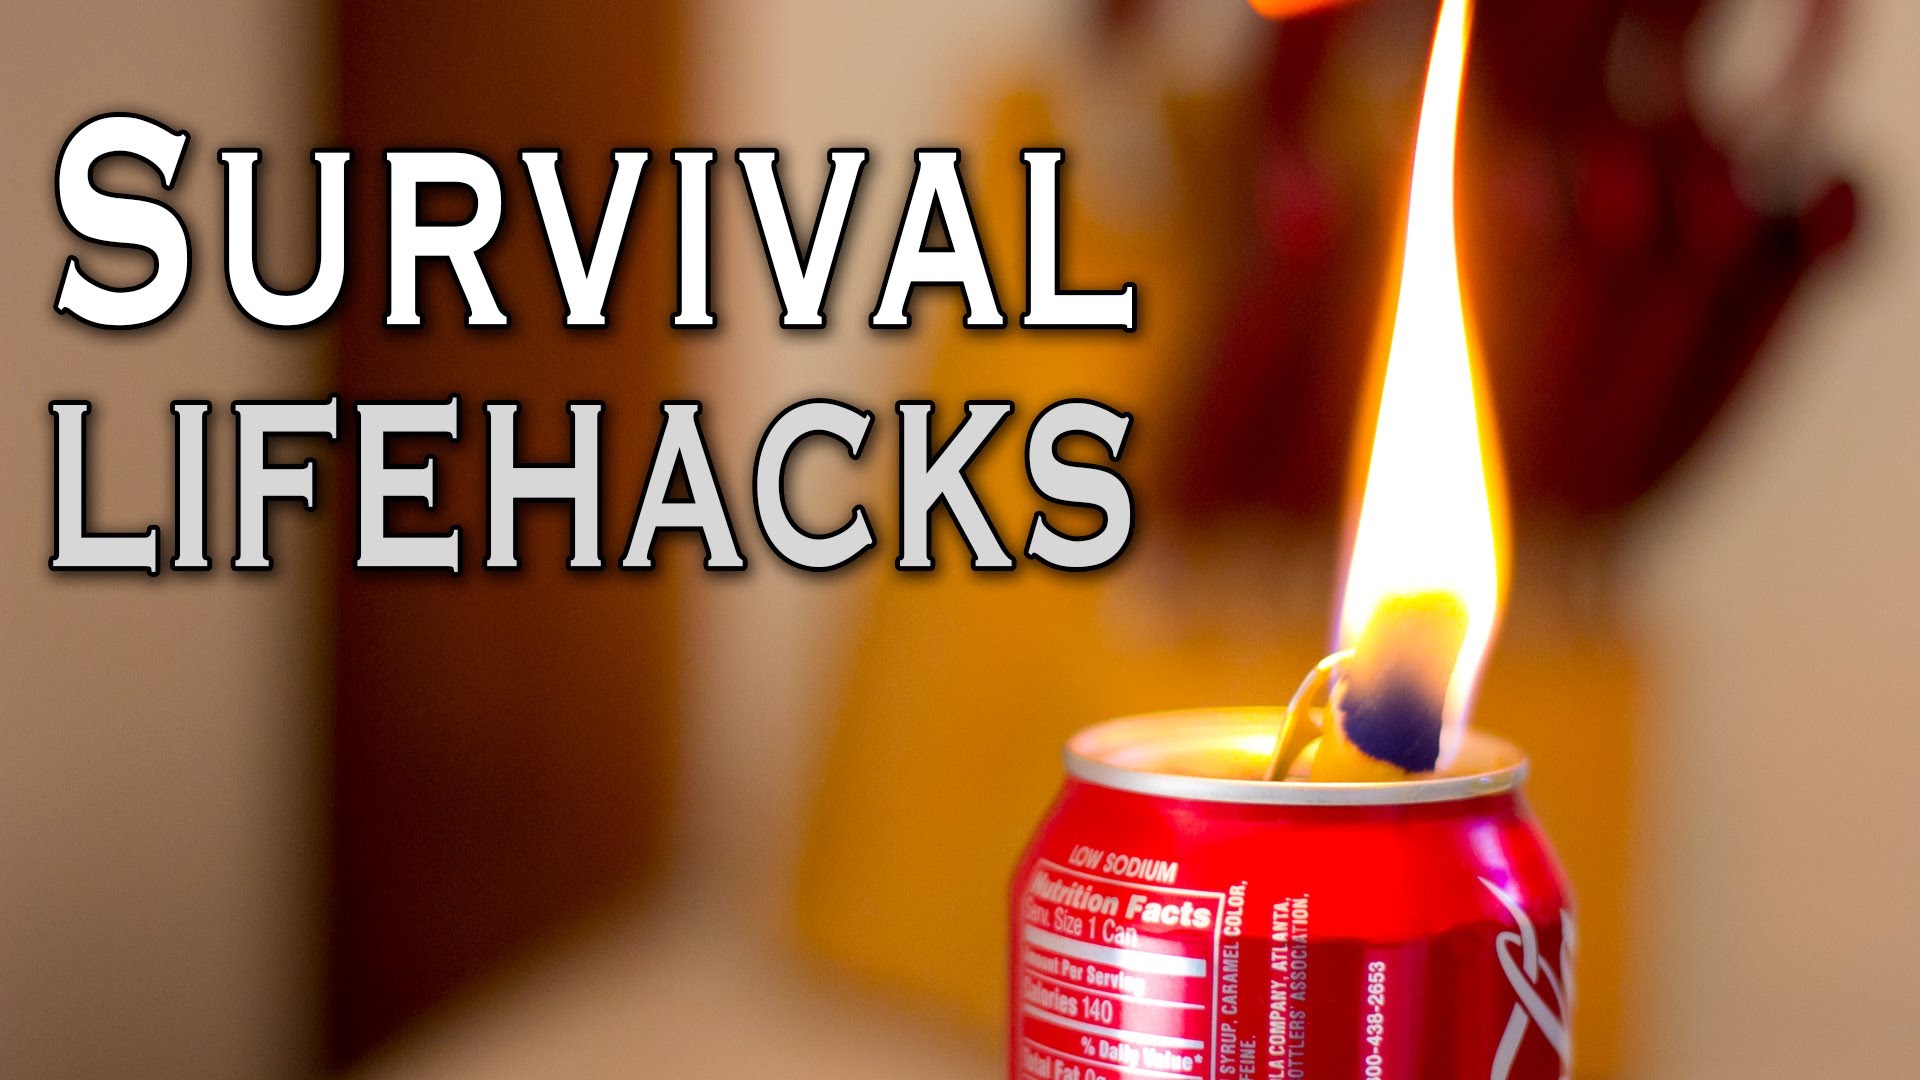 7 Survival Life Hacks That Could Save Your Life